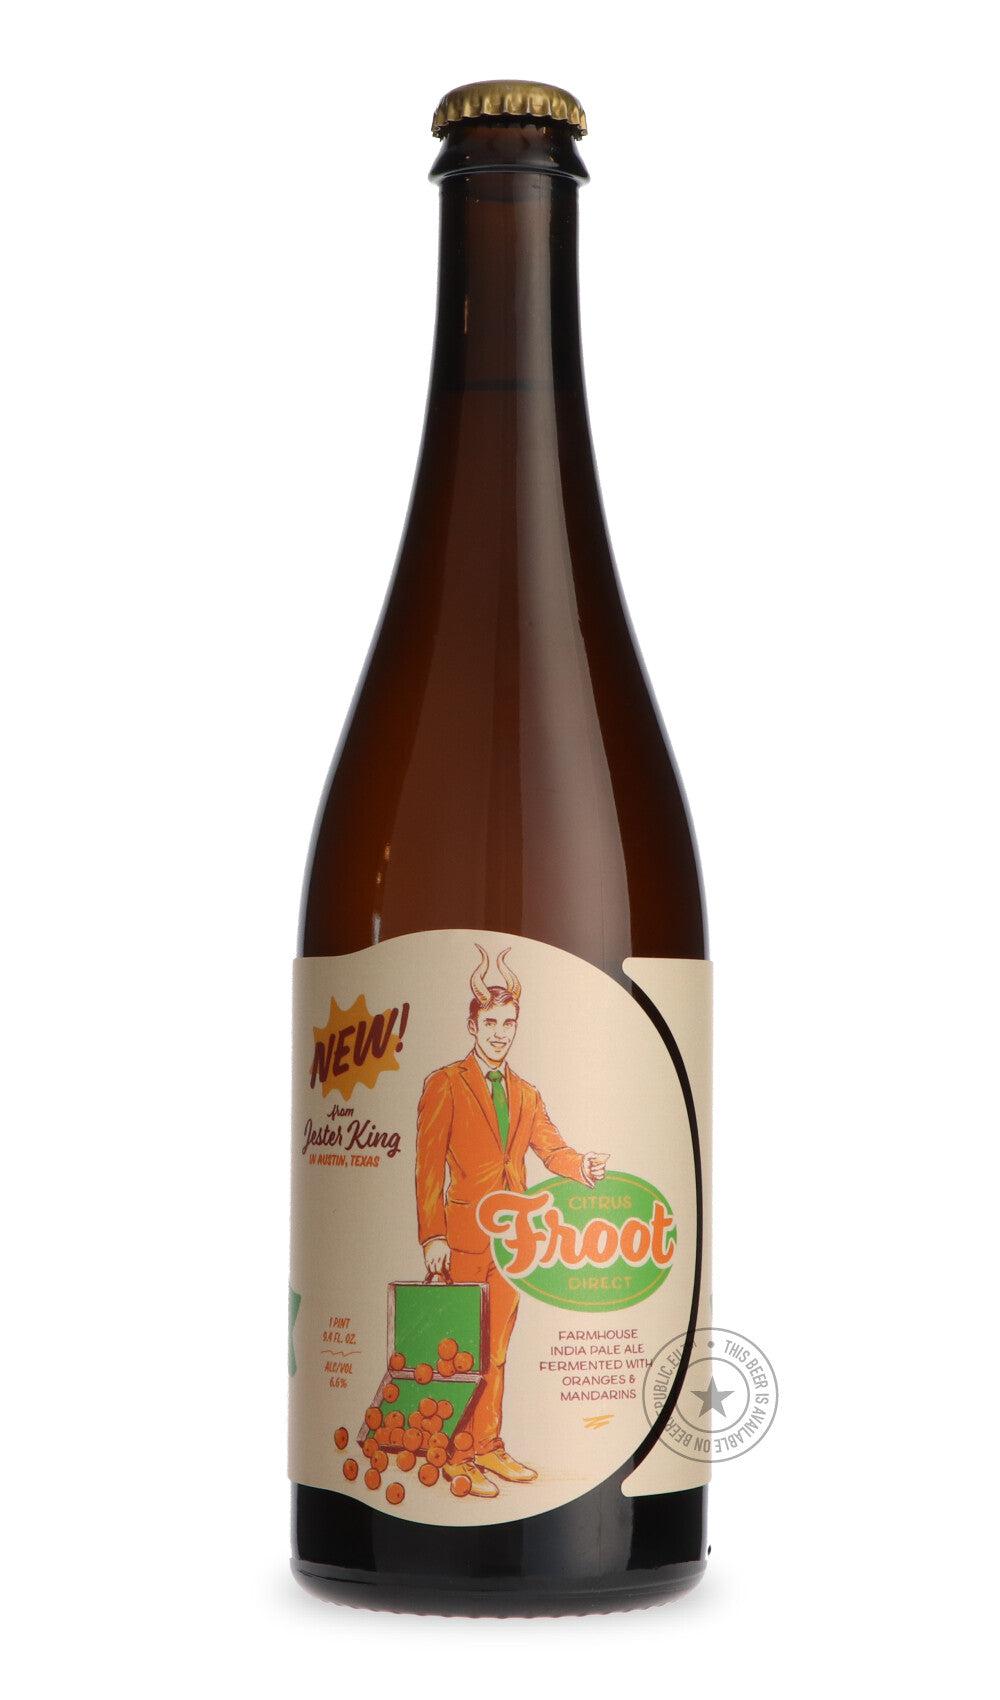 -Jester King- Citrus Froot Direct-IPA- Only @ Beer Republic - The best online beer store for American & Canadian craft beer - Buy beer online from the USA and Canada - Bier online kopen - Amerikaans bier kopen - Craft beer store - Craft beer kopen - Amerikanisch bier kaufen - Bier online kaufen - Acheter biere online - IPA - Stout - Porter - New England IPA - Hazy IPA - Imperial Stout - Barrel Aged - Barrel Aged Imperial Stout - Brown - Dark beer - Blond - Blonde - Pilsner - Lager - Wheat - Weizen - Amber -